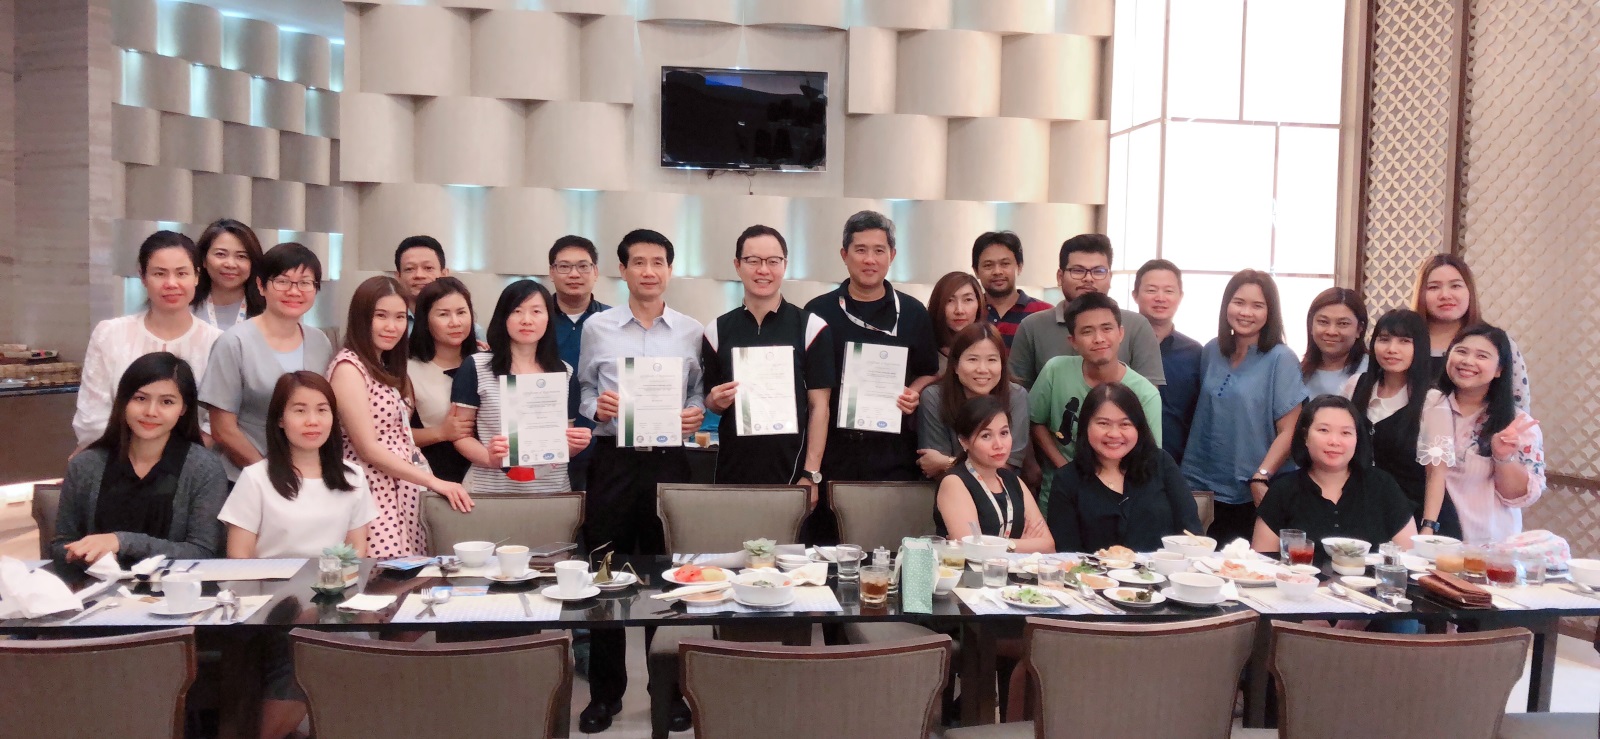 main Pacific Internet Thailand ได้จัดงาน Certification Ceremony - Pacific Internet